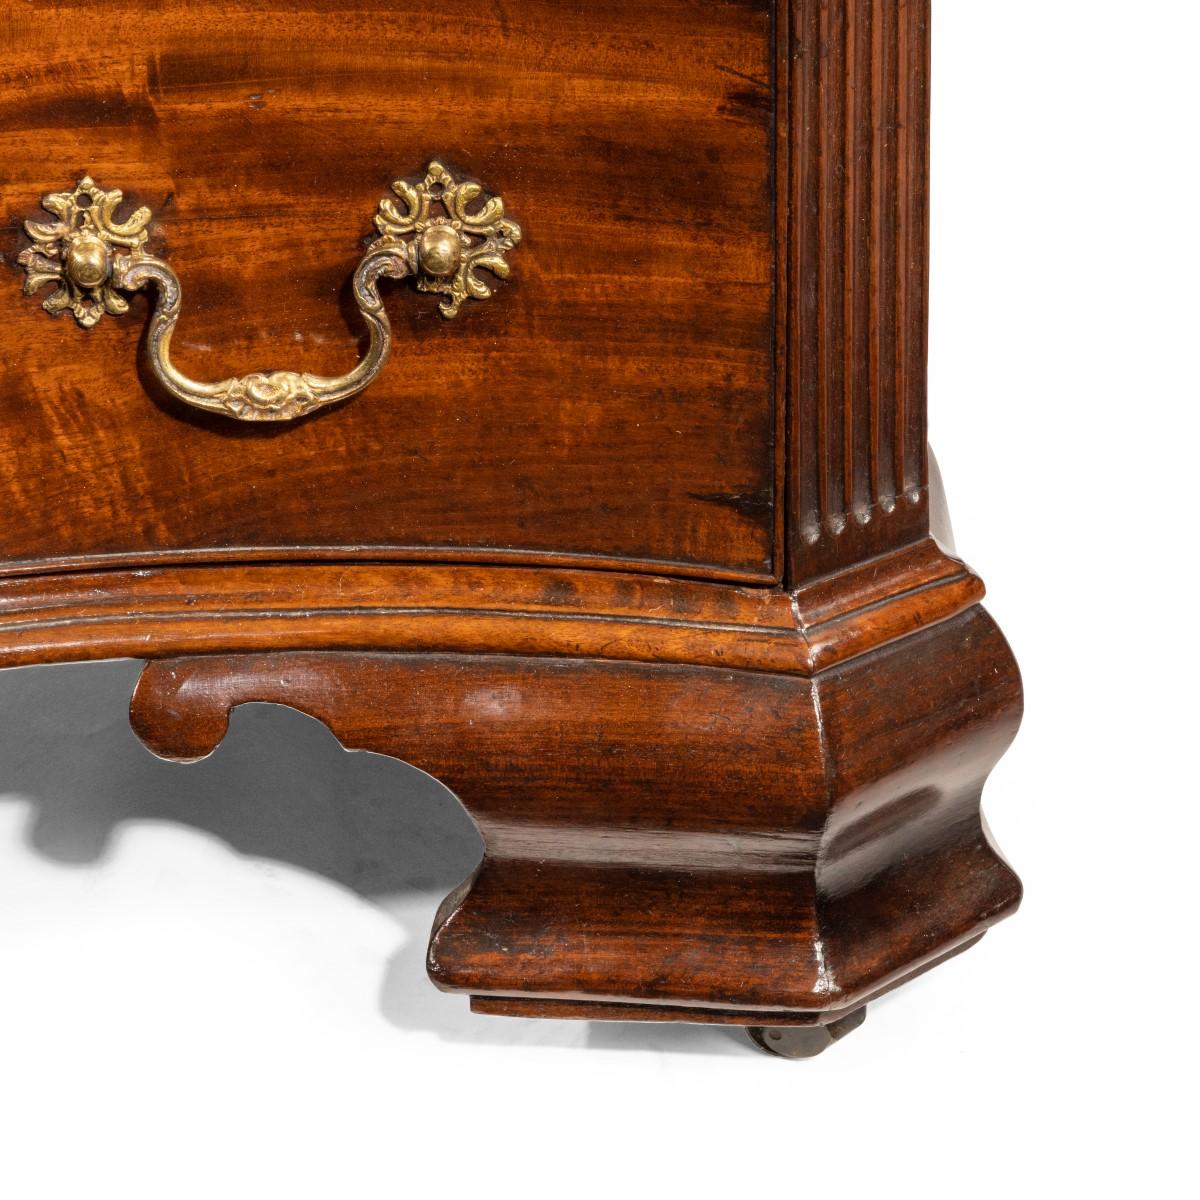 A flame mahogany George III serpentine chest of drawers